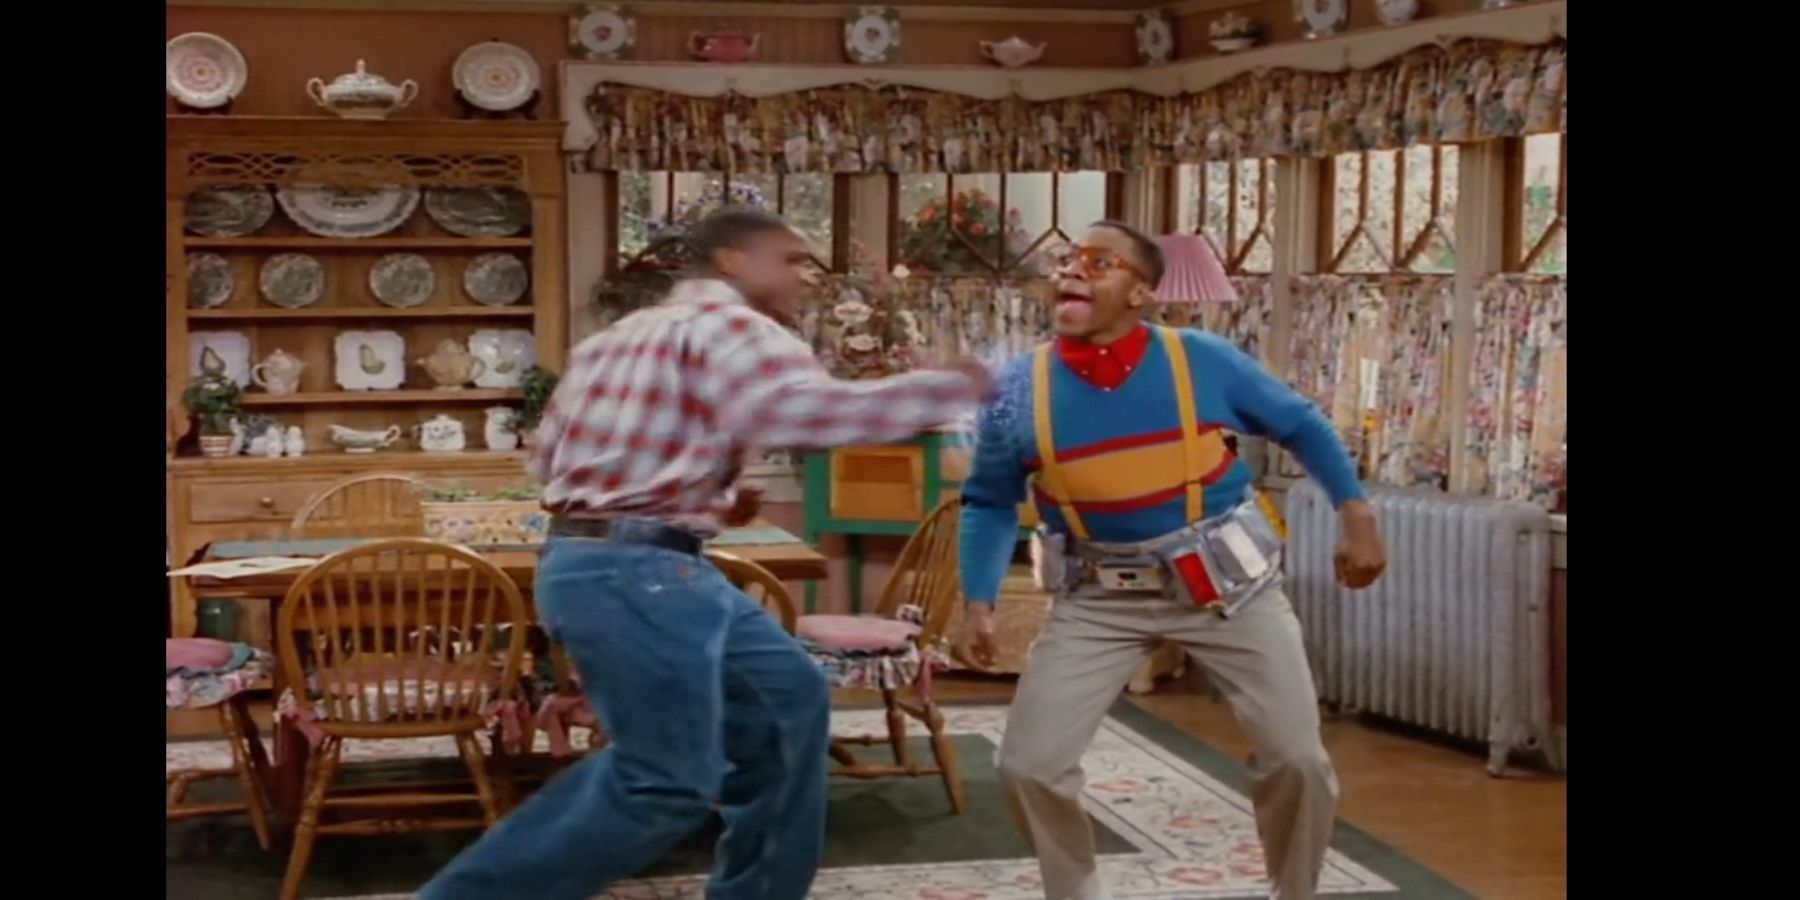 Steve Urkel defends himself with a Force Field against Eddie in Family Matters